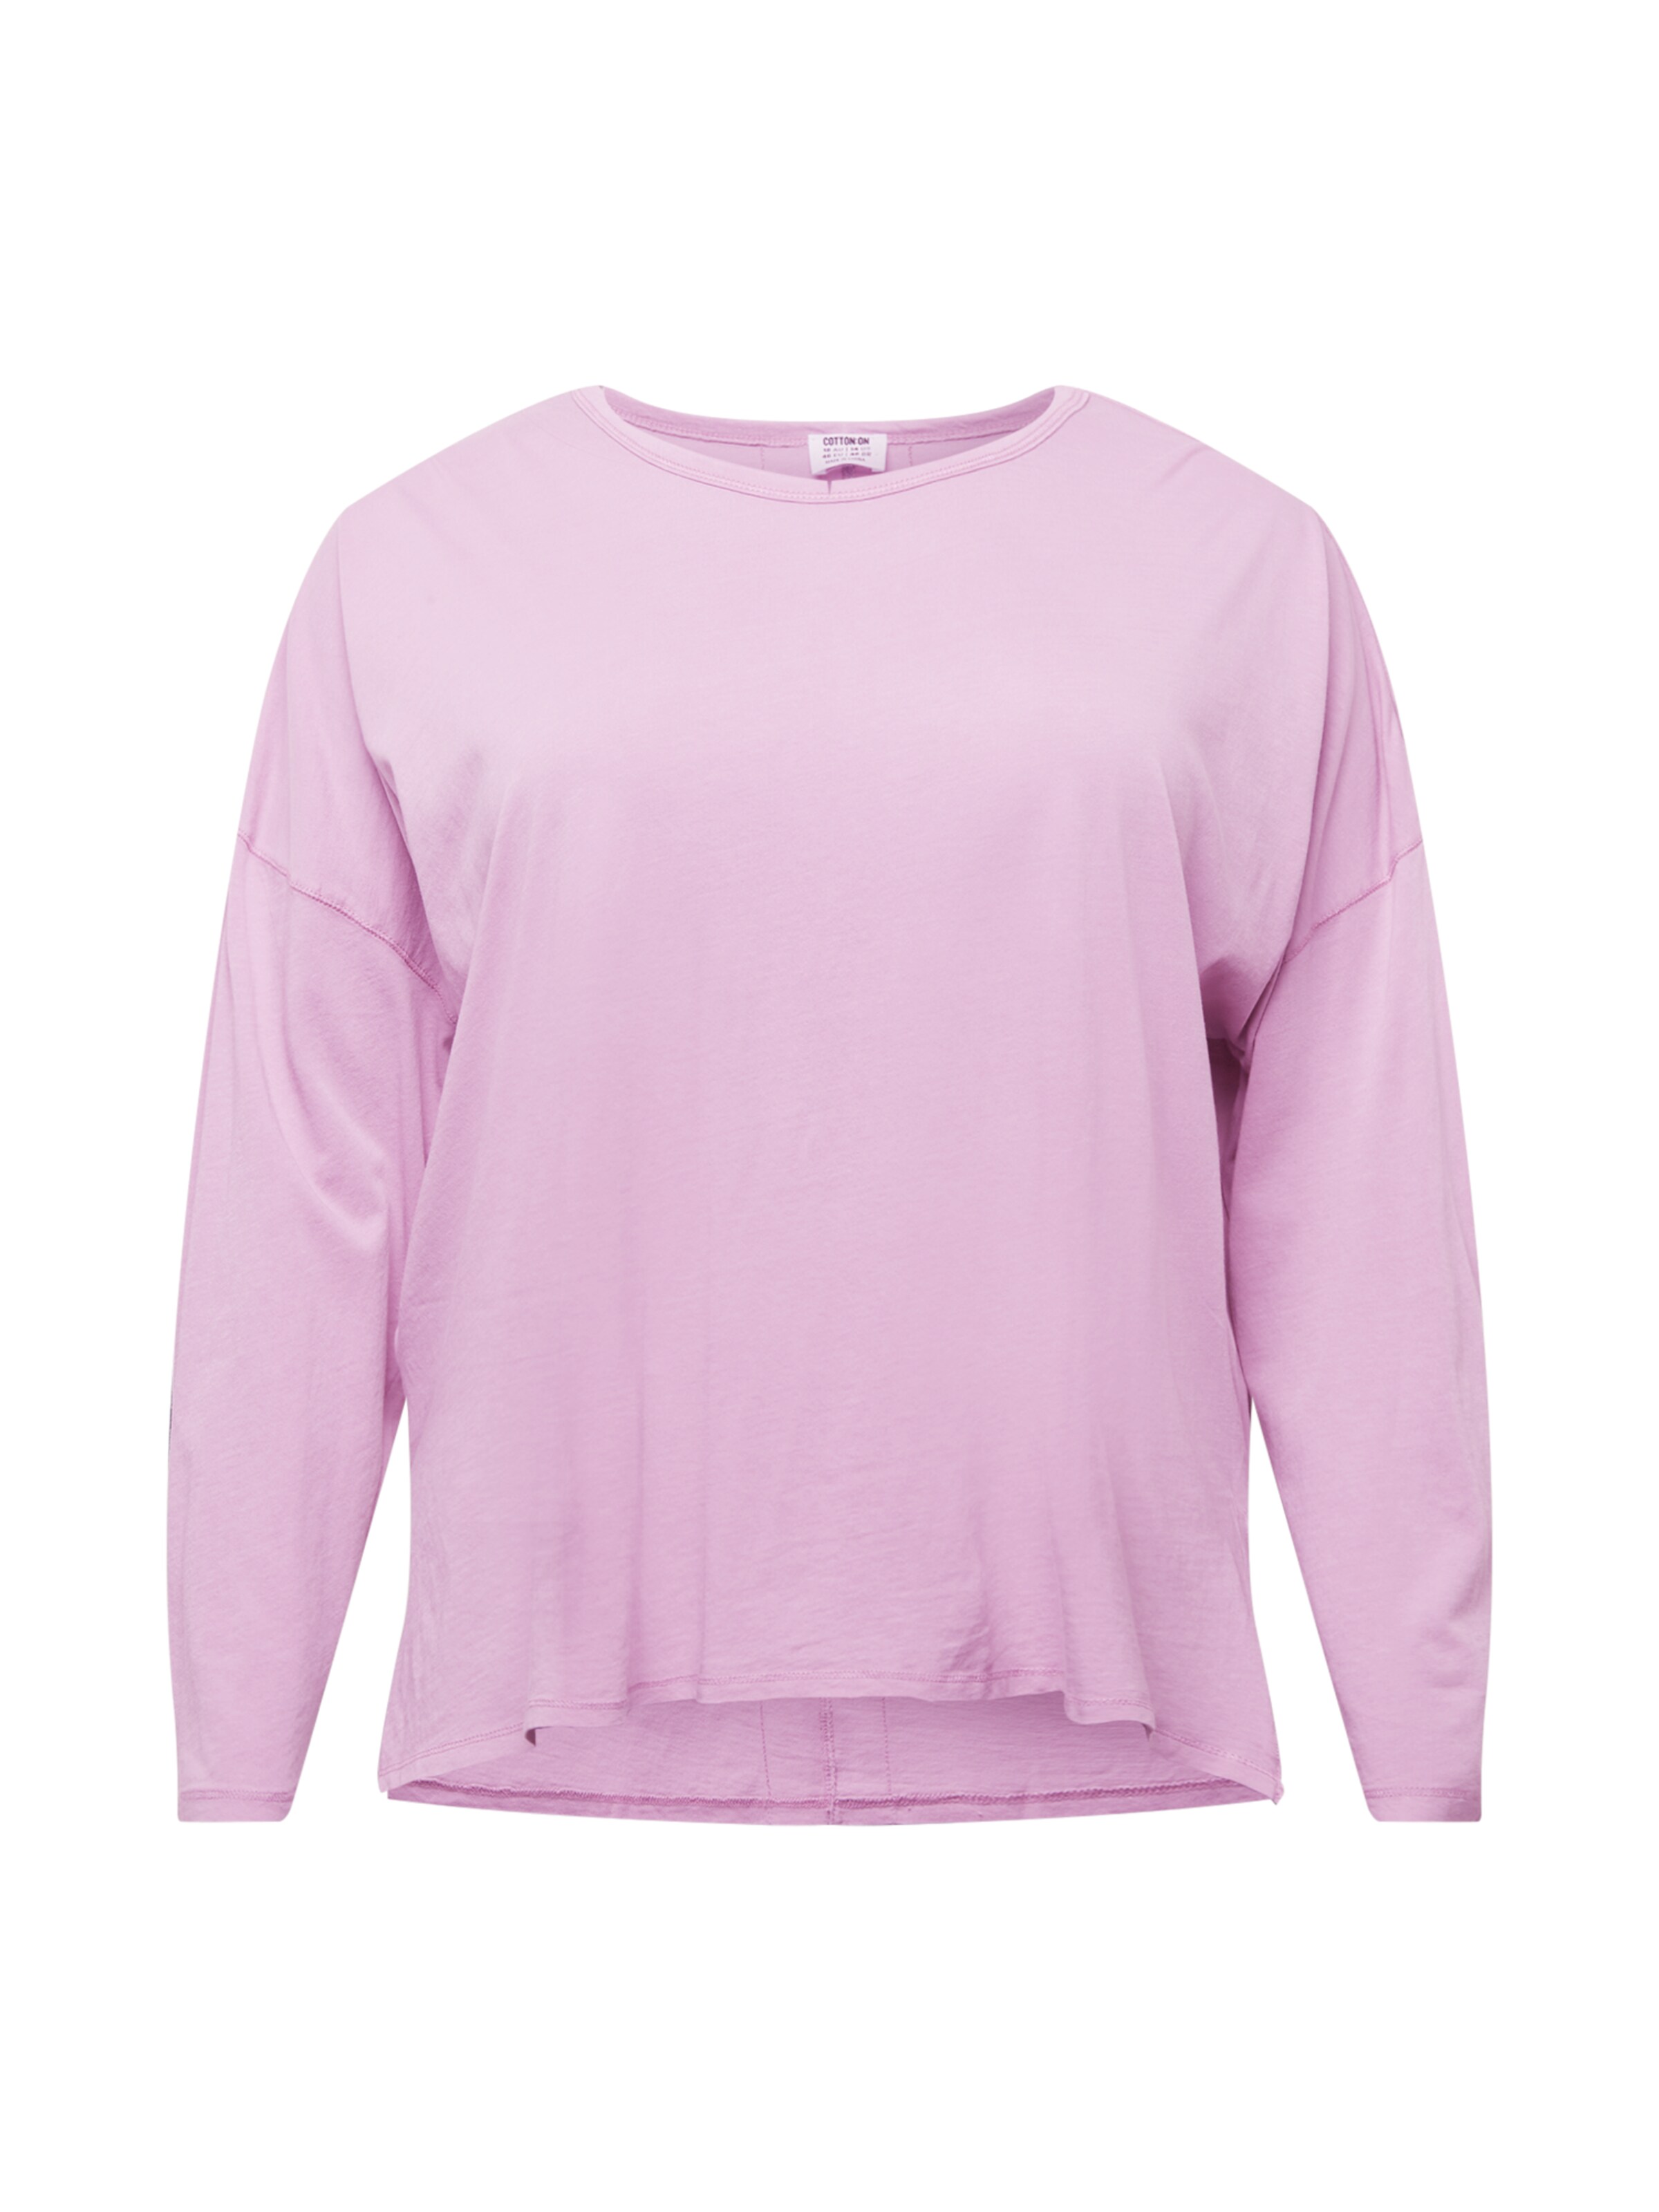 Frauen Shirts & Tops Cotton On Curve Shirt in Mauve - WS94487